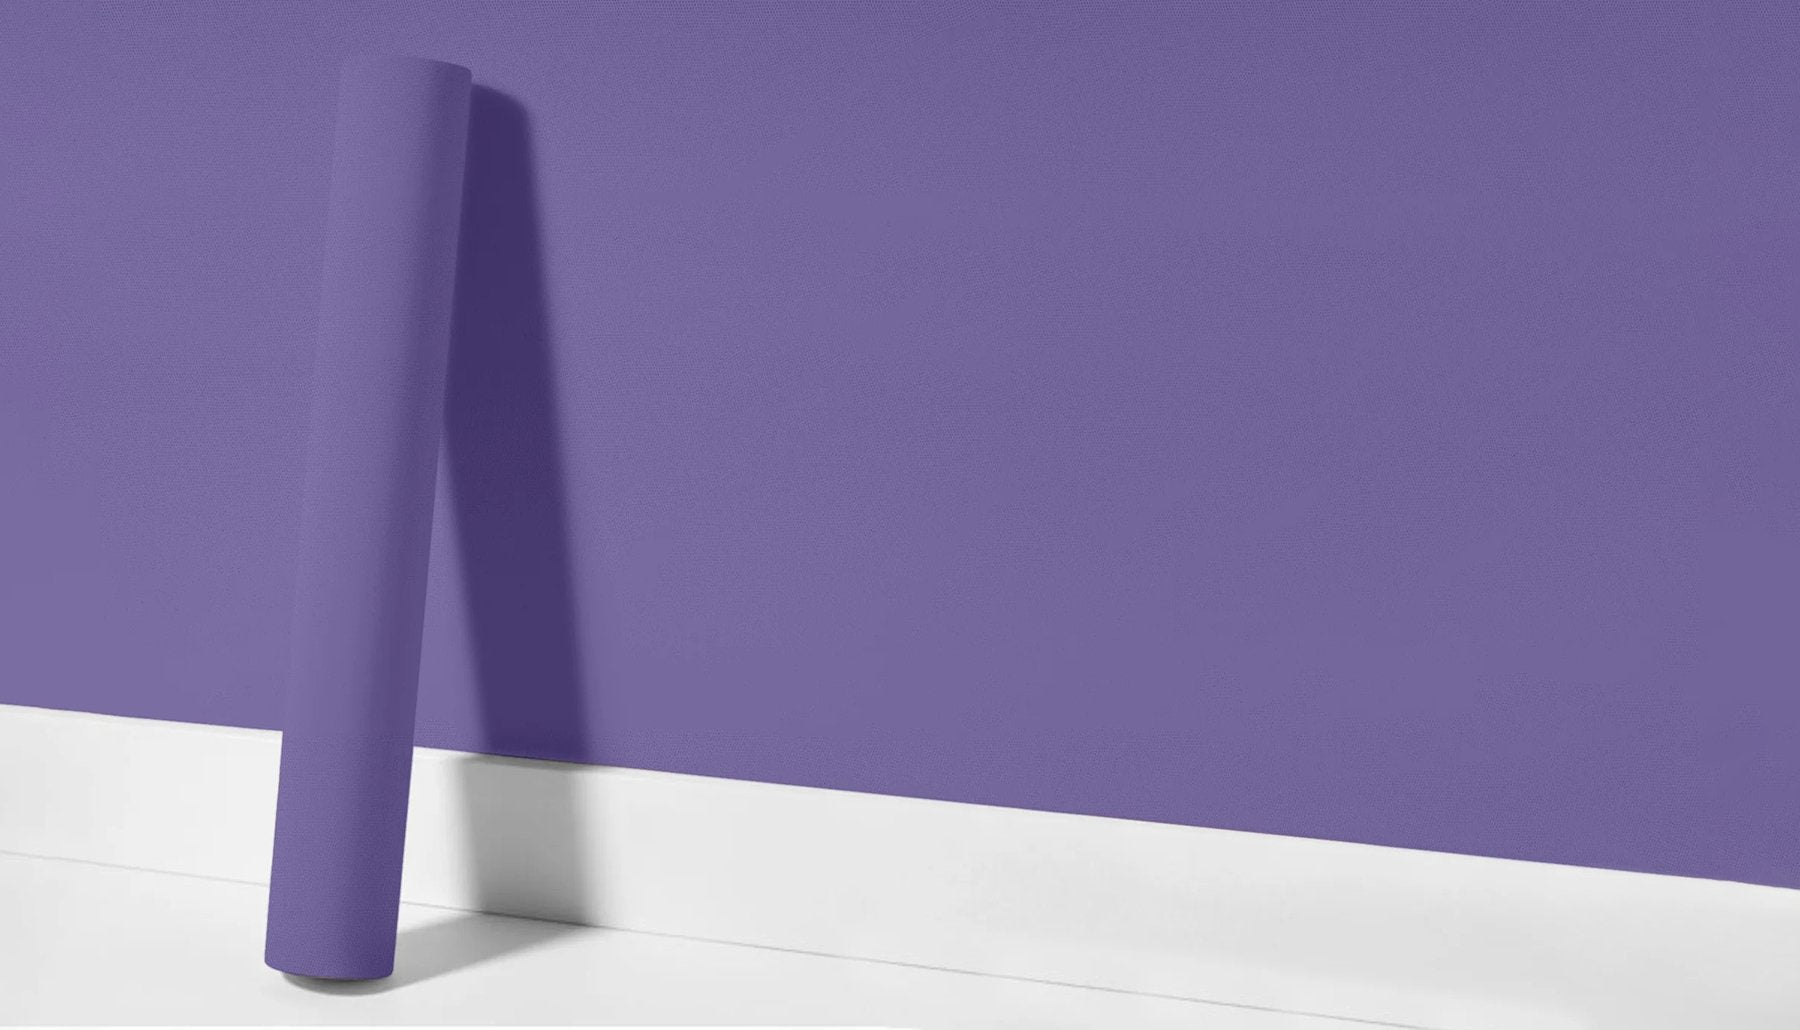 Peel & Stick Removable Re-usable Paint - Color RAL 4005 Blue Lilac - offRAL™ - RALRAW LLC, USA